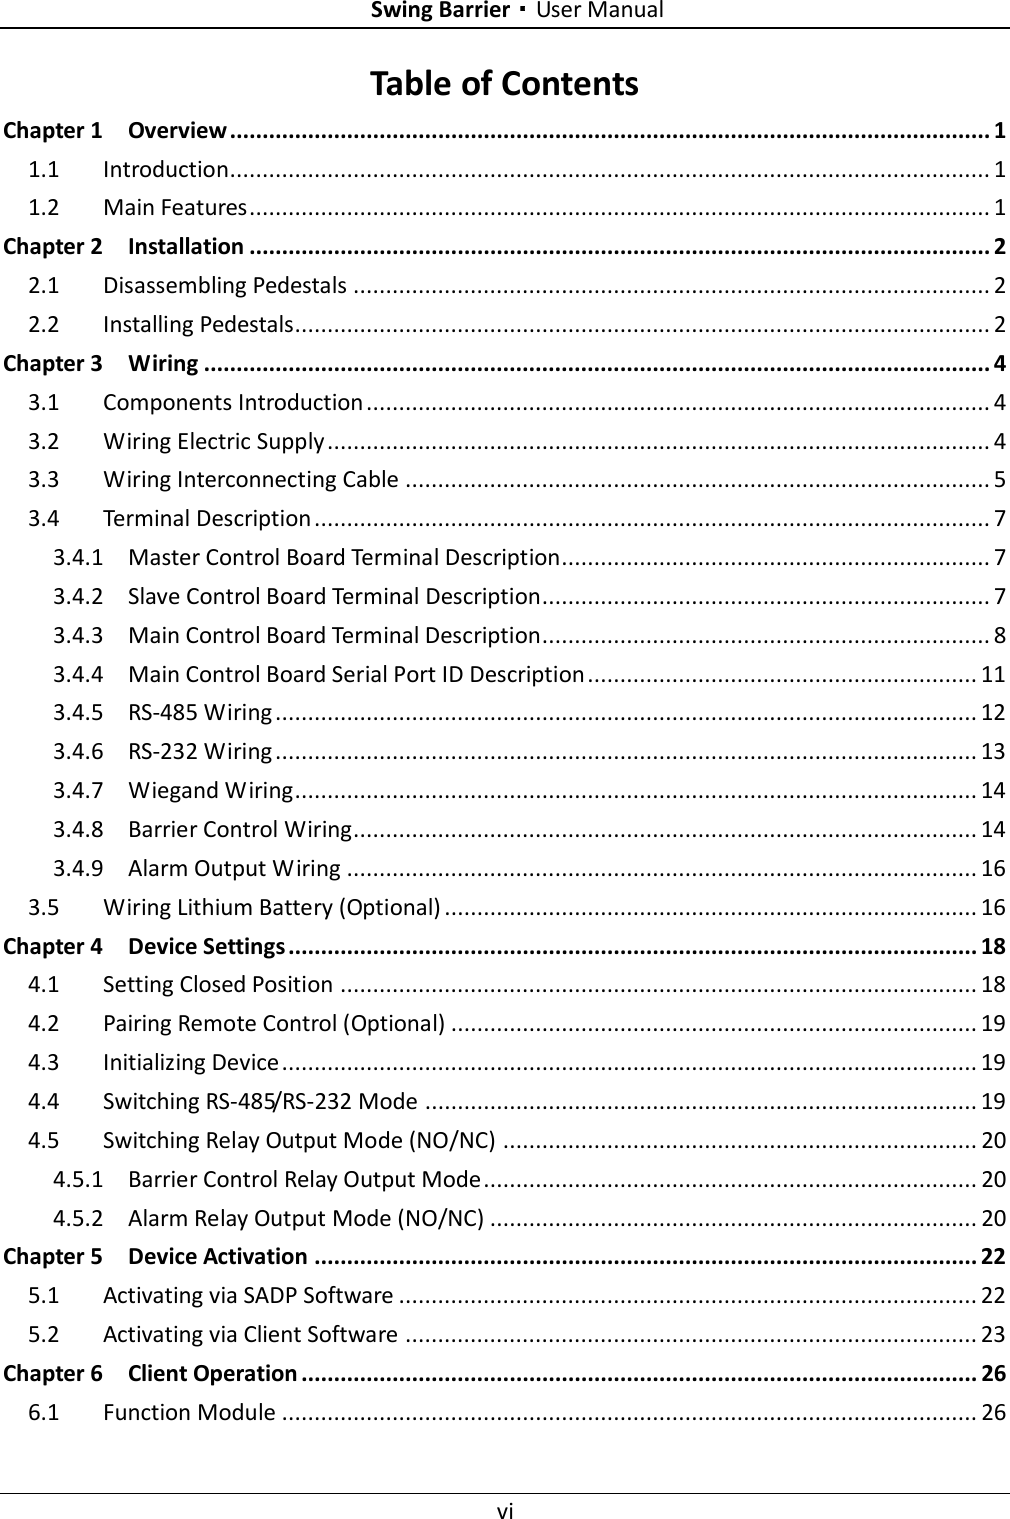    Swing Barrier·User Manual vi  Table of Contents Chapter 1 Overview ..................................................................................................................... 1 1.1 Introduction..................................................................................................................... 1 1.2 Main Features .................................................................................................................. 1 Chapter 2 Installation .................................................................................................................. 2 2.1 Disassembling Pedestals .................................................................................................. 2 2.2 Installing Pedestals........................................................................................................... 2 Chapter 3 Wiring ......................................................................................................................... 4 3.1 Components Introduction ................................................................................................ 4 3.2 Wiring Electric Supply ...................................................................................................... 4 3.3 Wiring Interconnecting Cable .......................................................................................... 5 3.4 Terminal Description ........................................................................................................ 7 3.4.1 Master Control Board Terminal Description.................................................................. 7 3.4.2 Slave Control Board Terminal Description..................................................................... 7 3.4.3 Main Control Board Terminal Description..................................................................... 8 3.4.4 Main Control Board Serial Port ID Description ............................................................ 11 3.4.5 RS-485 Wiring ............................................................................................................ 12 3.4.6 RS-232 Wiring ............................................................................................................ 13 3.4.7 Wiegand Wiring ......................................................................................................... 14 3.4.8 Barrier Control Wiring................................................................................................ 14 3.4.9 Alarm Output Wiring ................................................................................................. 16 3.5 Wiring Lithium Battery (Optional) .................................................................................. 16 Chapter 4 Device Settings .......................................................................................................... 18 4.1 Setting Closed Position .................................................................................................. 18 4.2 Pairing Remote Control (Optional) ................................................................................. 19 4.3 Initializing Device ........................................................................................................... 19 4.4 Switching RS-485/RS-232 Mode ..................................................................................... 19 4.5 Switching Relay Output Mode (NO/NC) ......................................................................... 20 4.5.1 Barrier Control Relay Output Mode ............................................................................ 20 4.5.2 Alarm Relay Output Mode (NO/NC) ........................................................................... 20 Chapter 5 Device Activation ...................................................................................................... 22 5.1 Activating via SADP Software ......................................................................................... 22 5.2 Activating via Client Software ........................................................................................ 23 Chapter 6 Client Operation ........................................................................................................ 26 6.1 Function Module ........................................................................................................... 26 